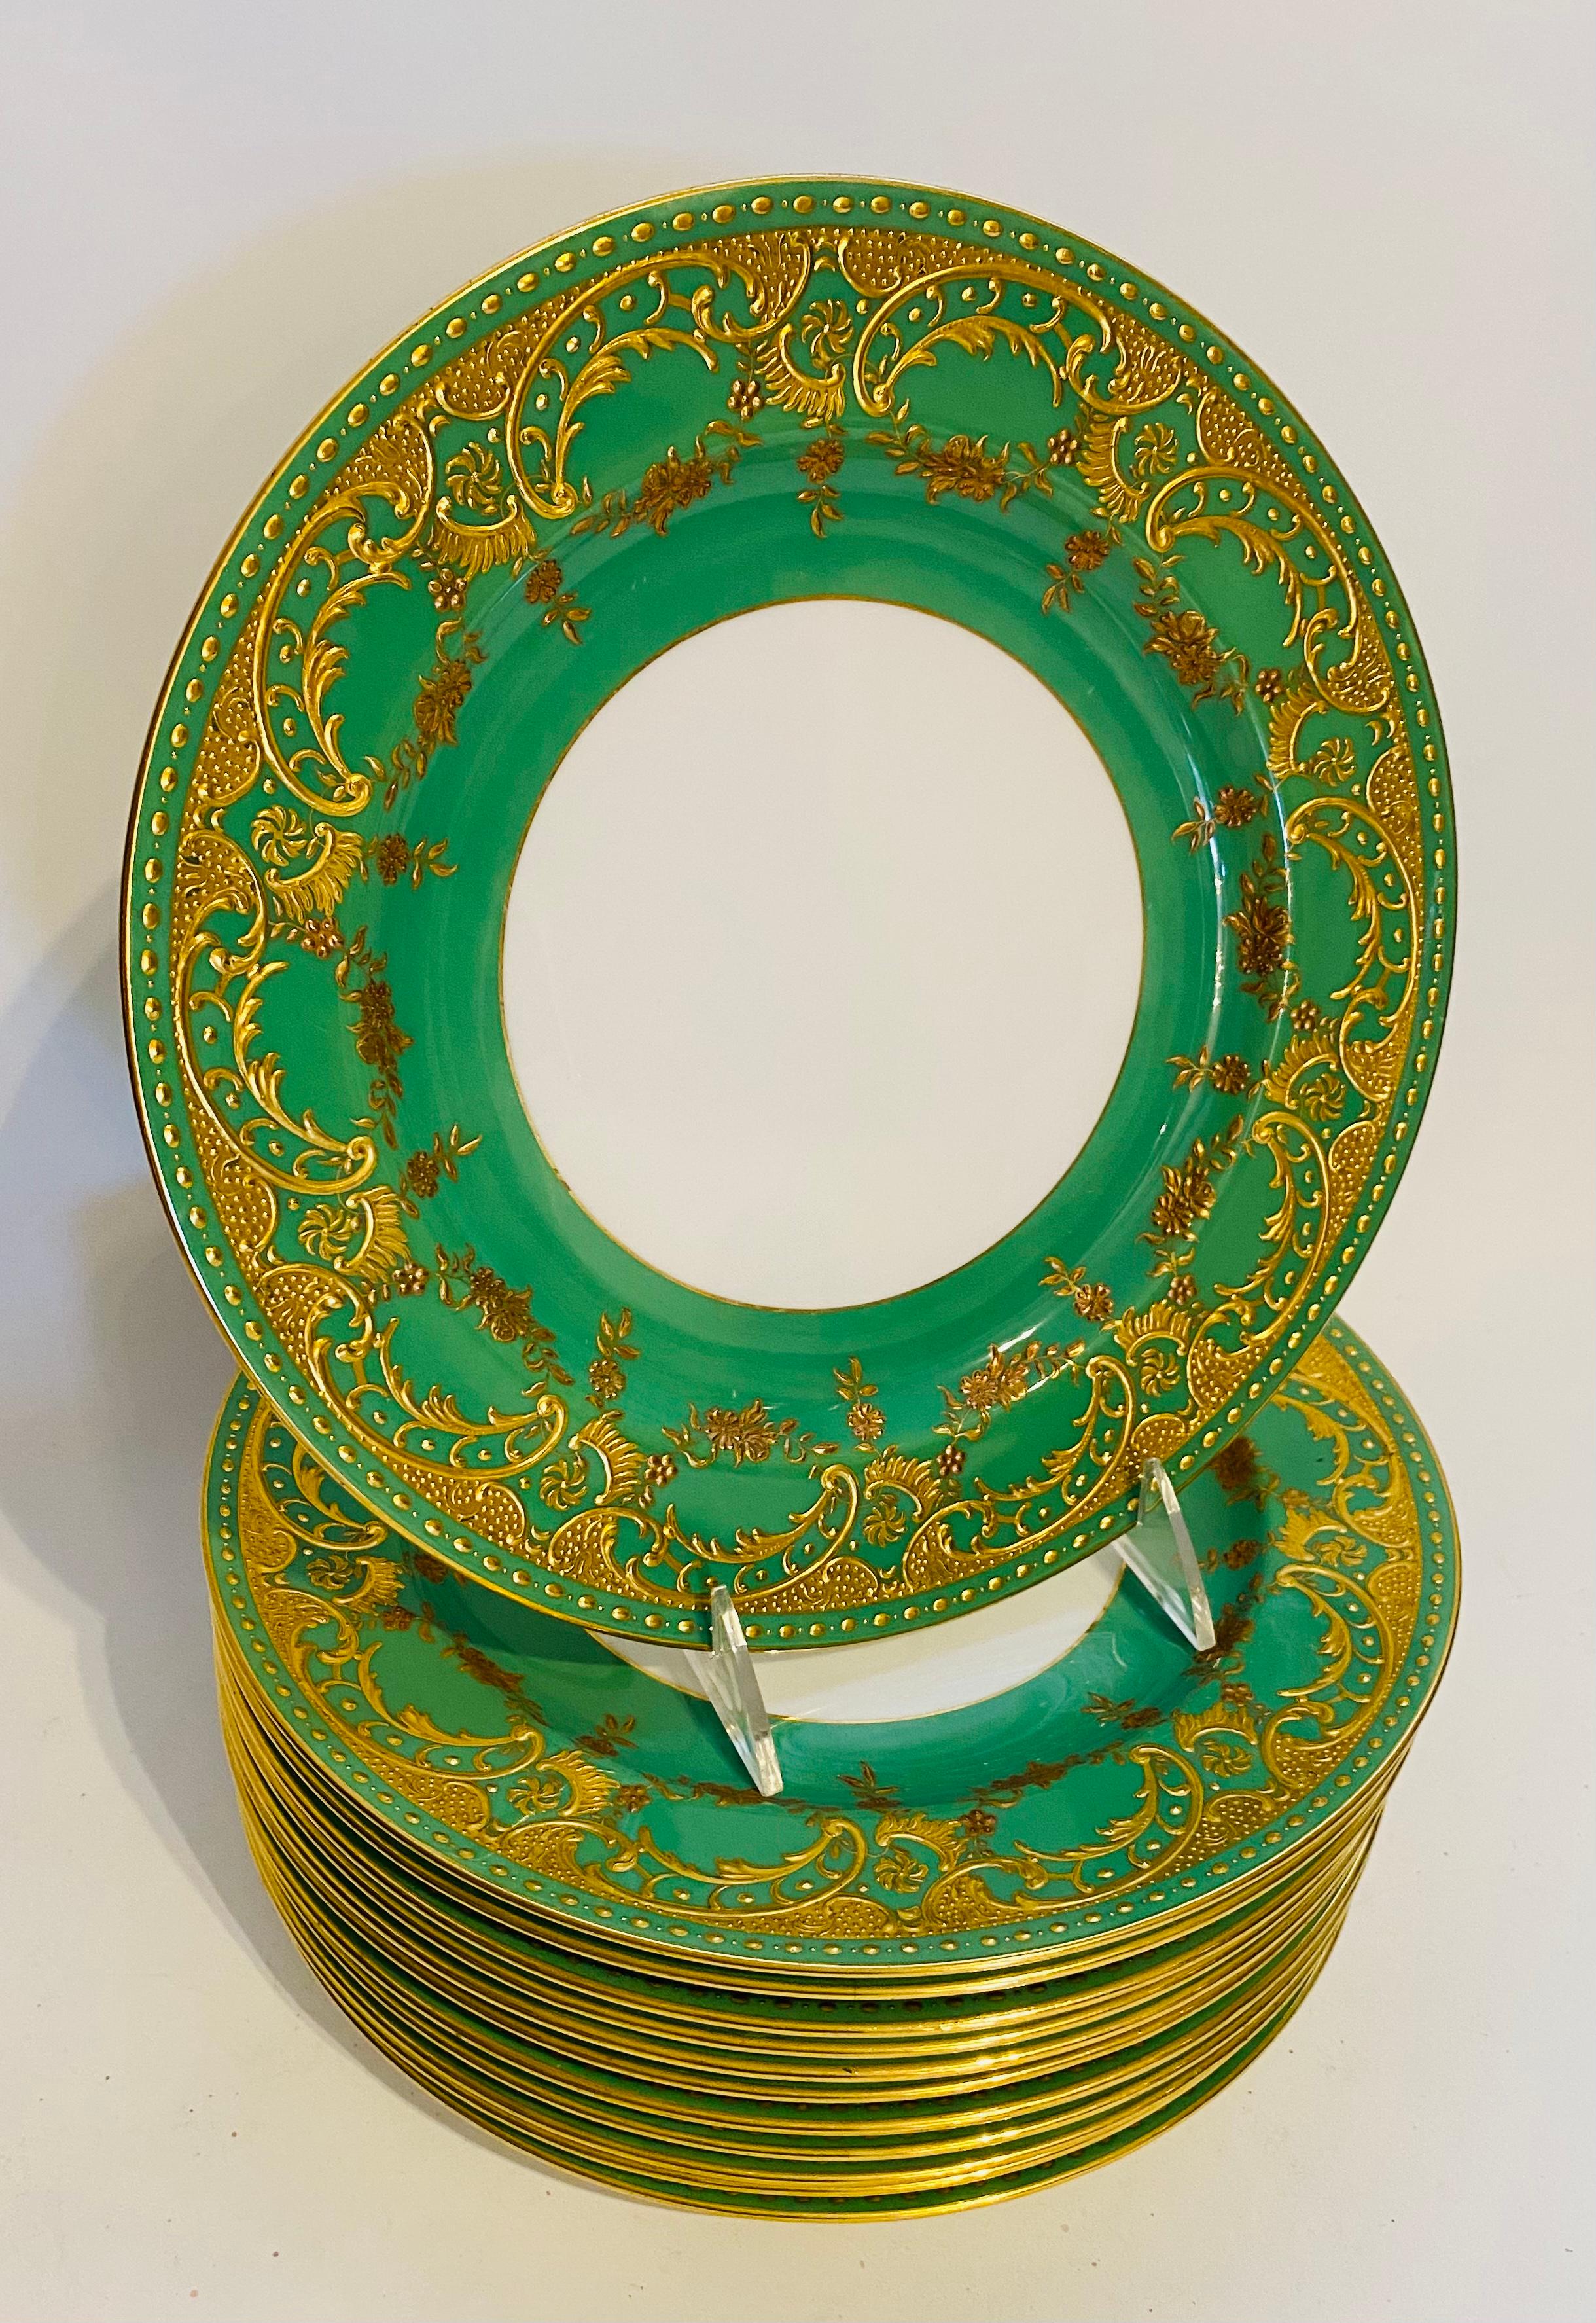 A gorgeous set ! Please click on the pictures to see the detail and enlarge. Heavy raised paste gilding on a vibrant green collar and custom ordered through the fine Gilded Age Retailer Gilman Collamore & Co New York. Wonderful and detailed design